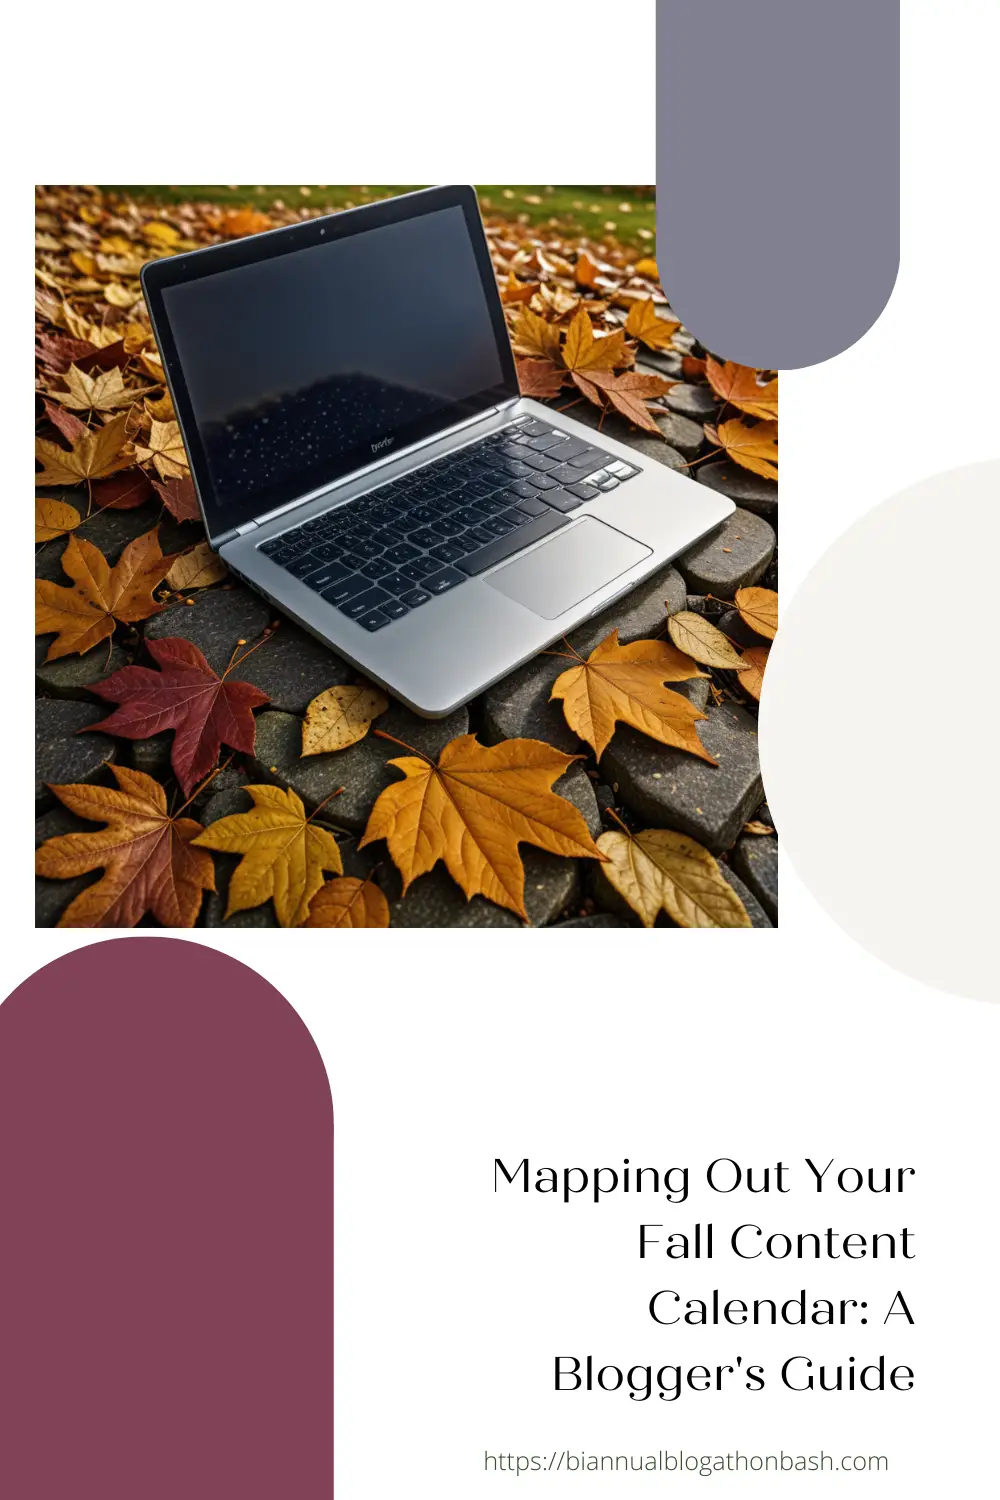 A laptop sitting on the ground surrounded by leaves.